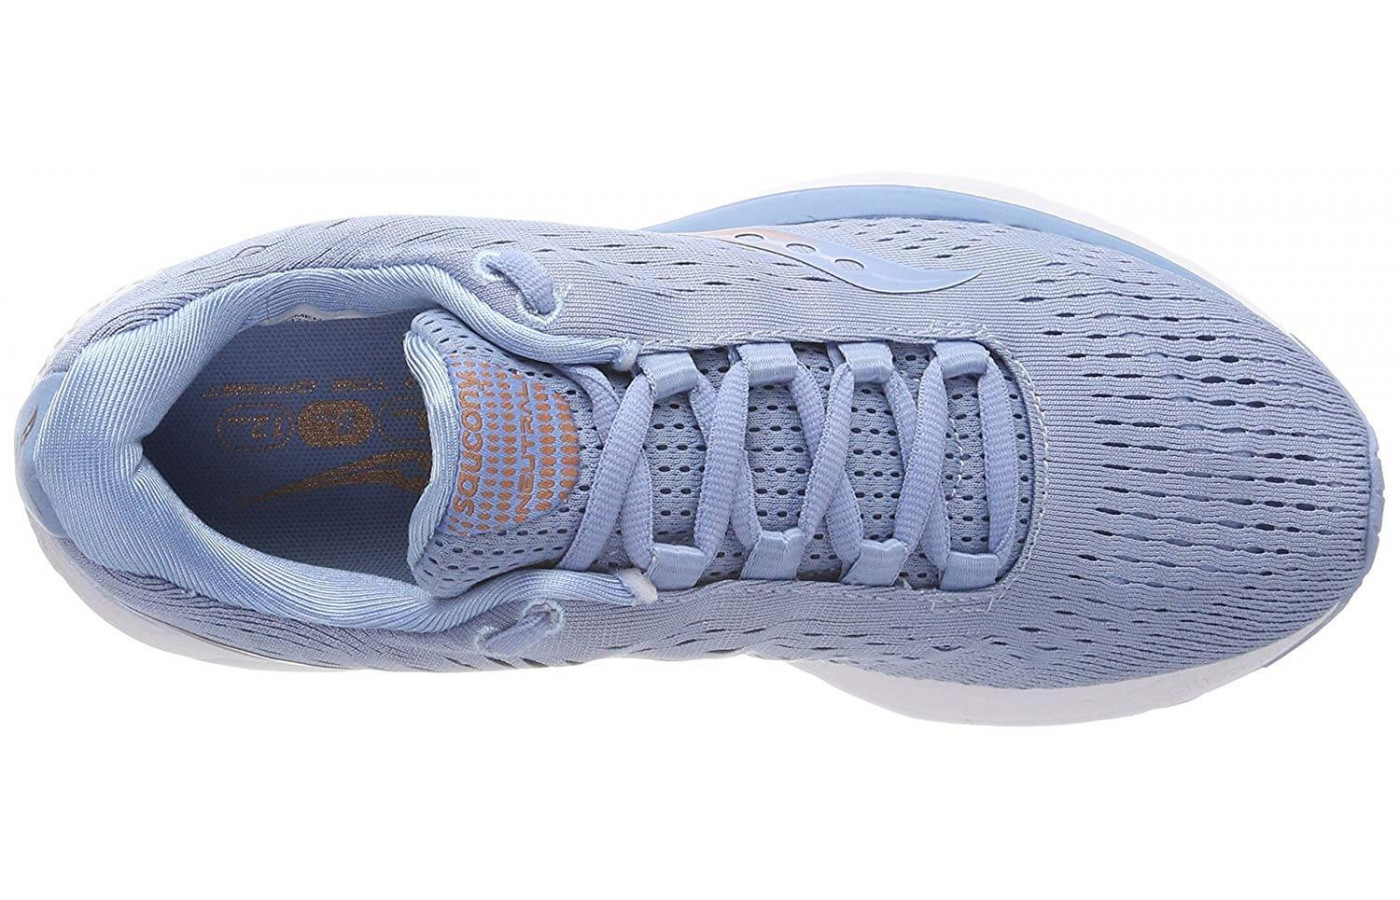 The Jazz 20 features an engineered mesh upper for greater comfort and breathability